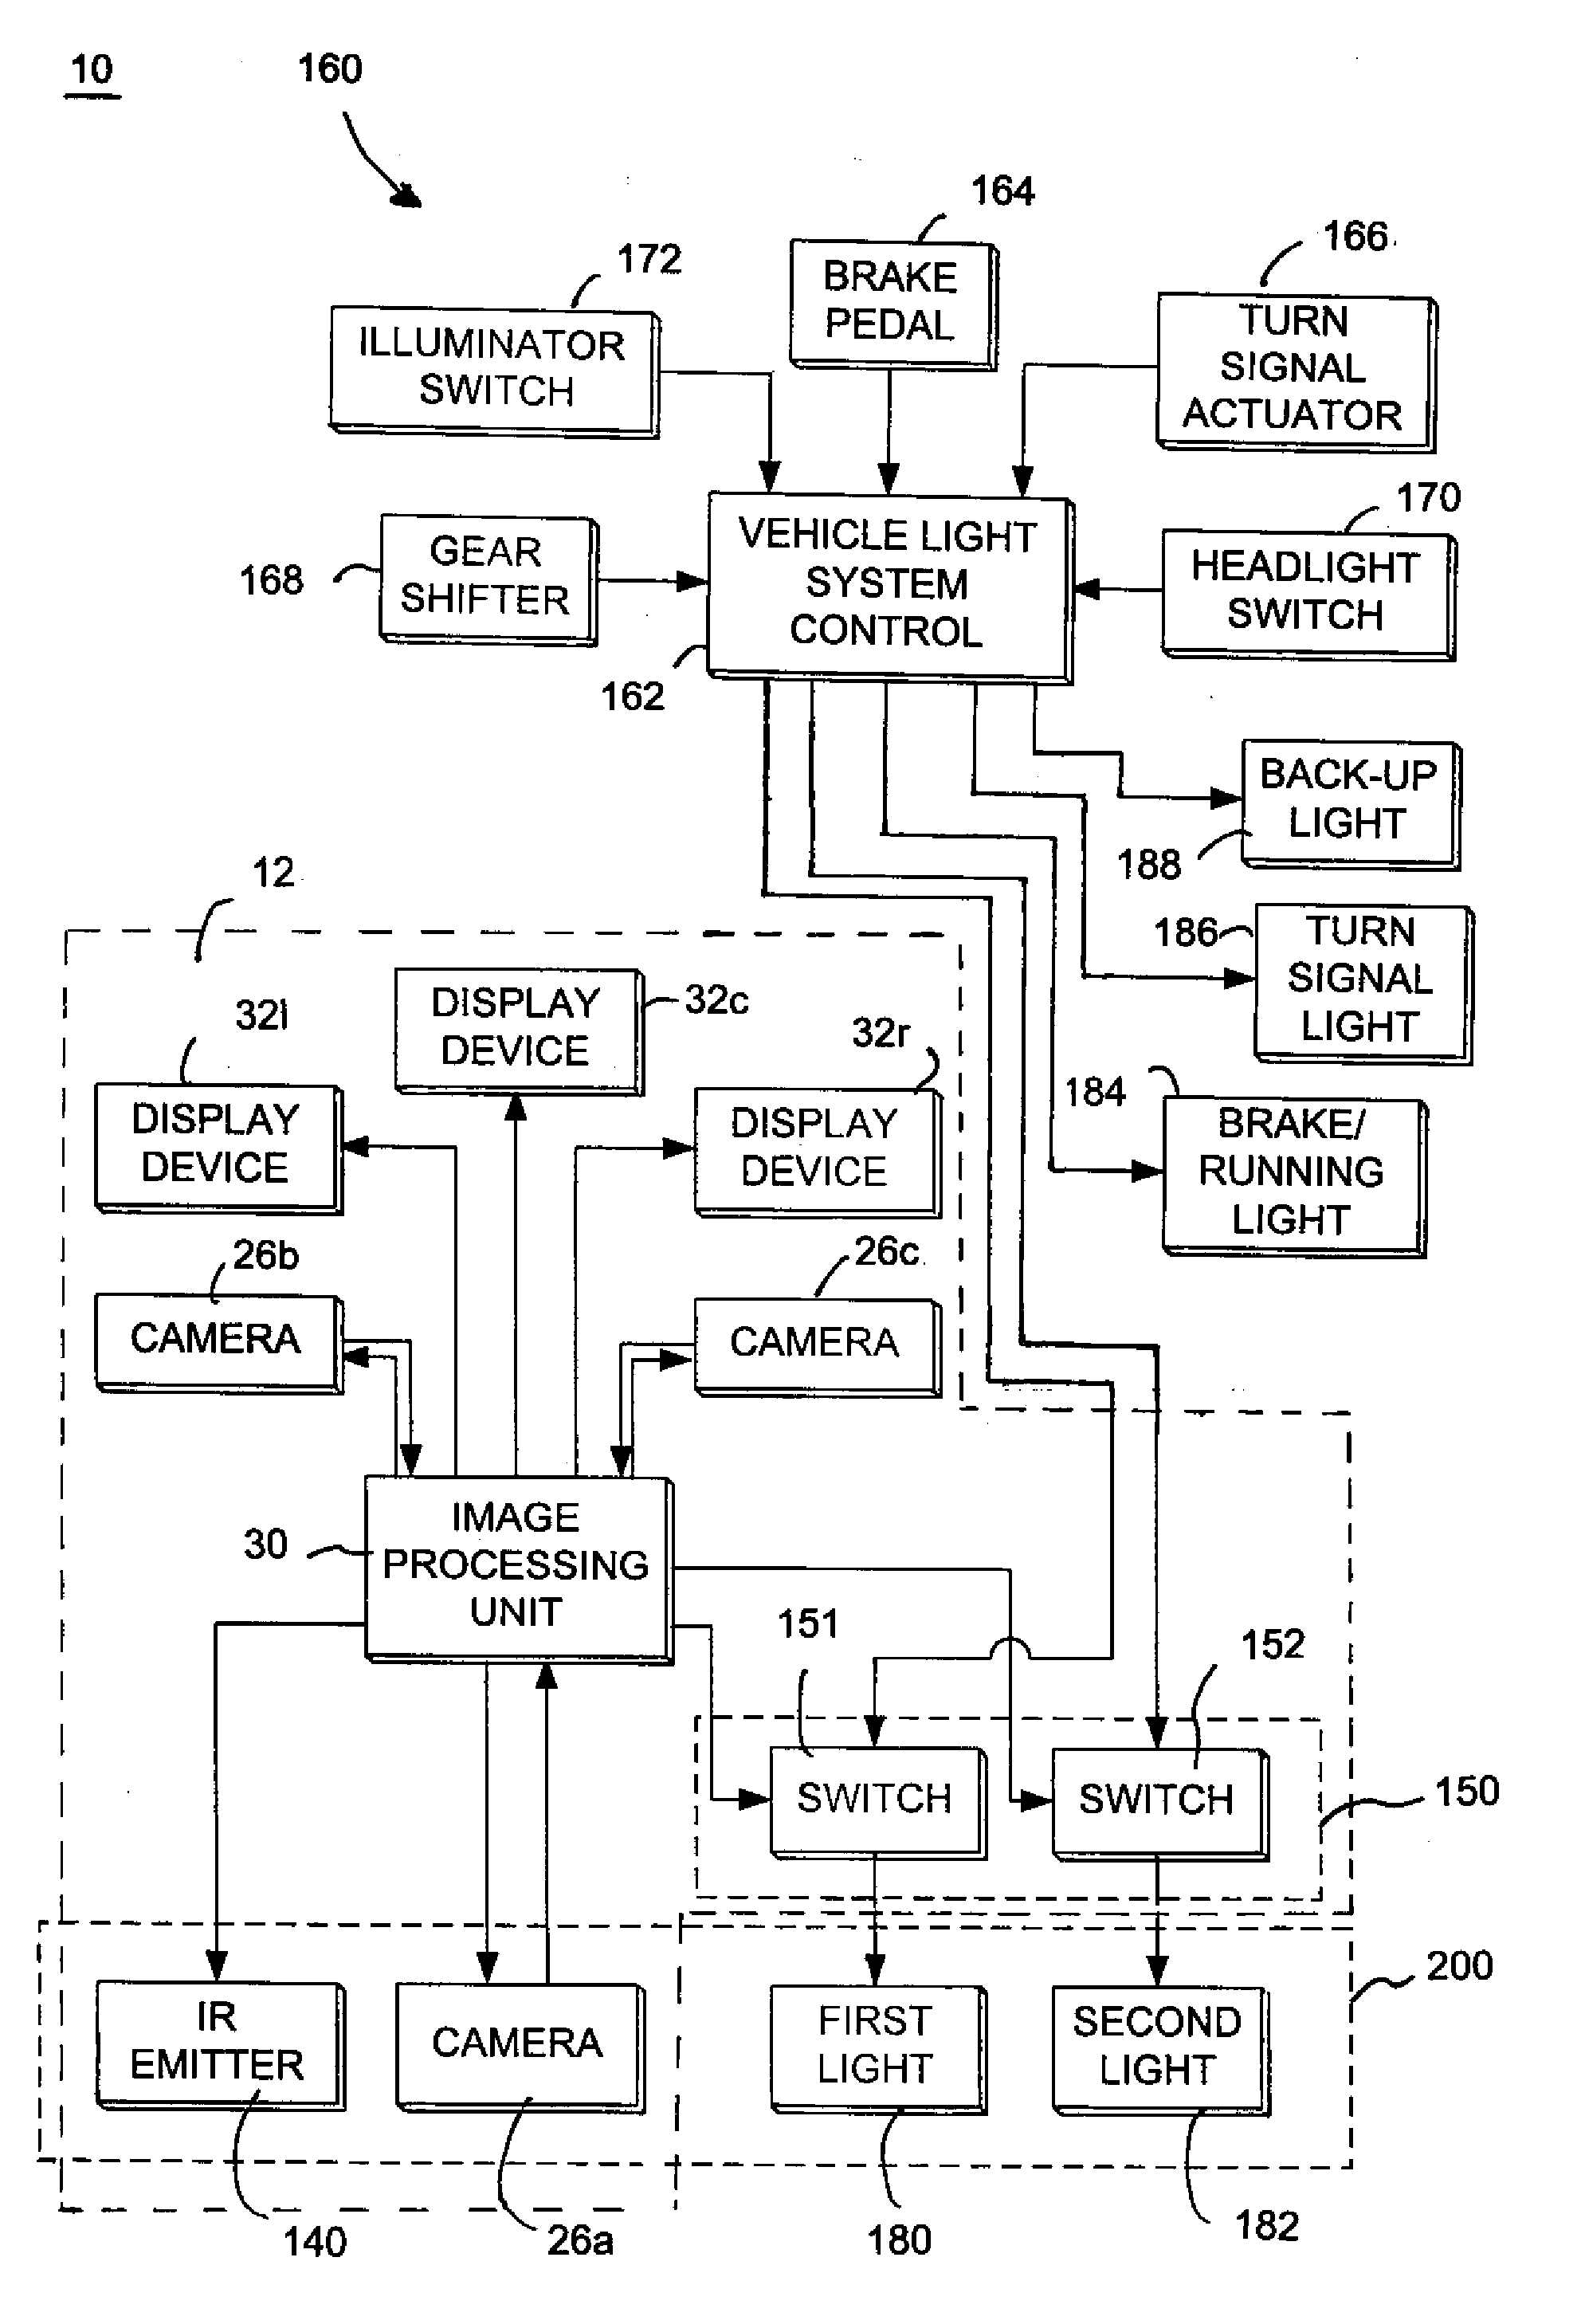 Systems and Components for Enhancing Rear Vision from a Vehicle